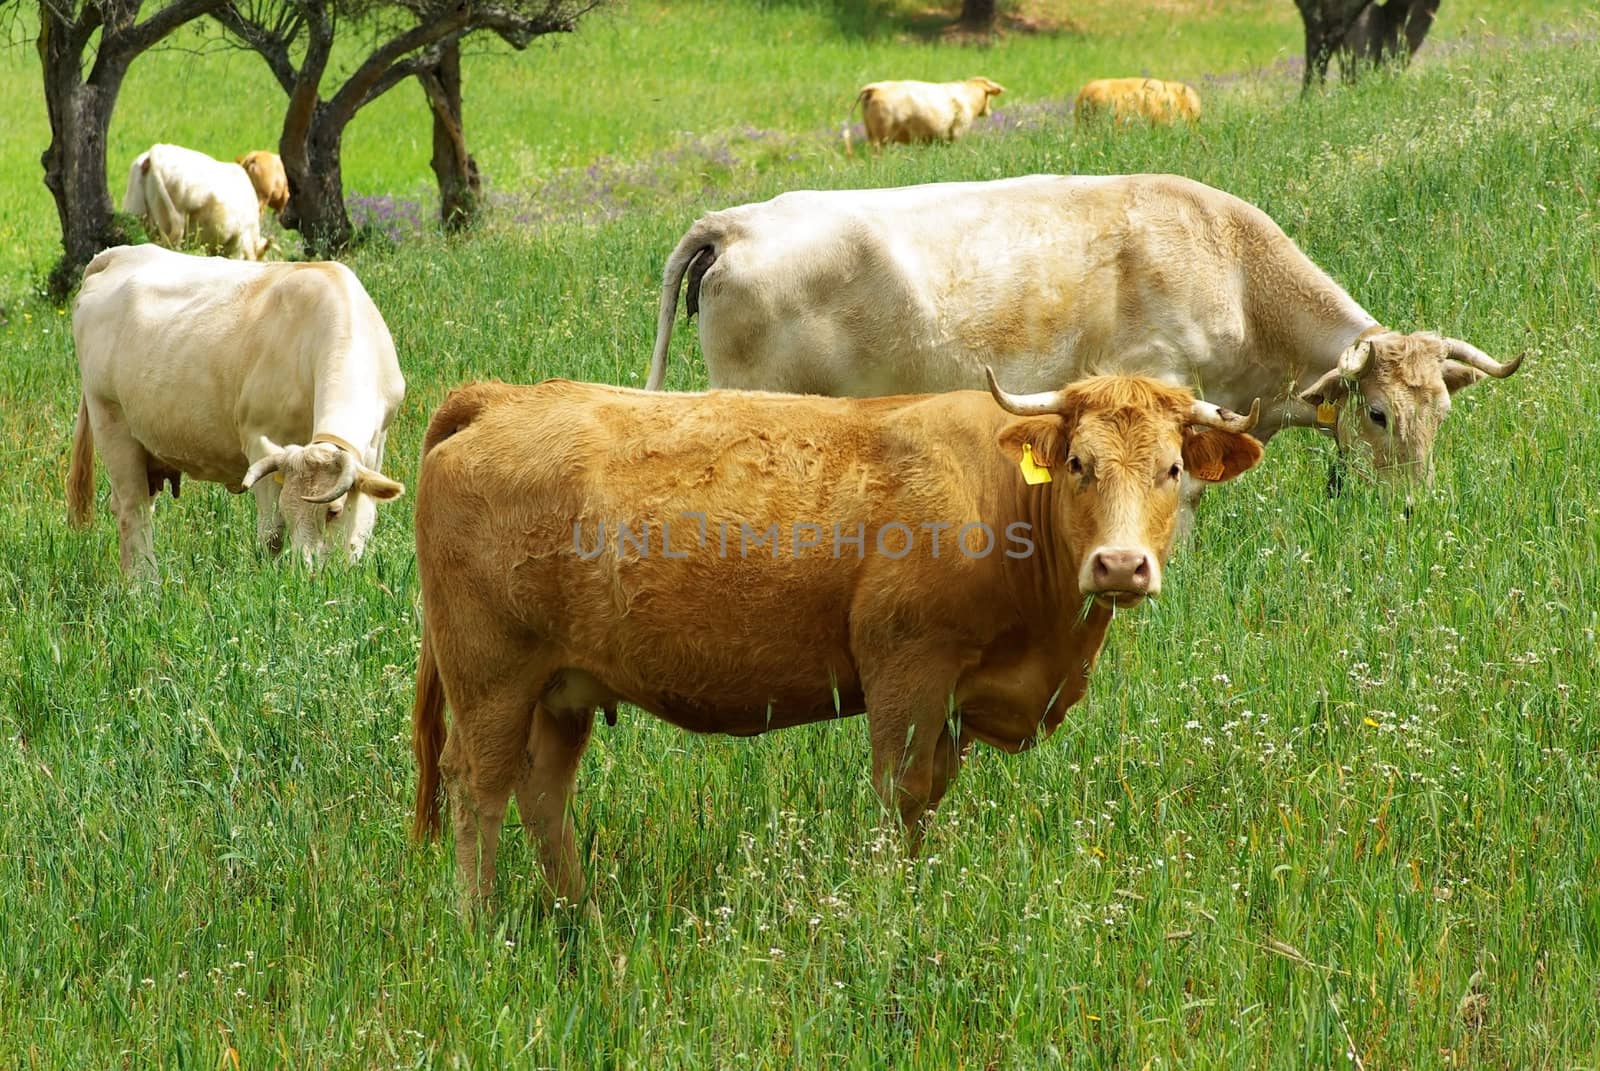 A cow of yellow coat looks at while it eats in the green field.